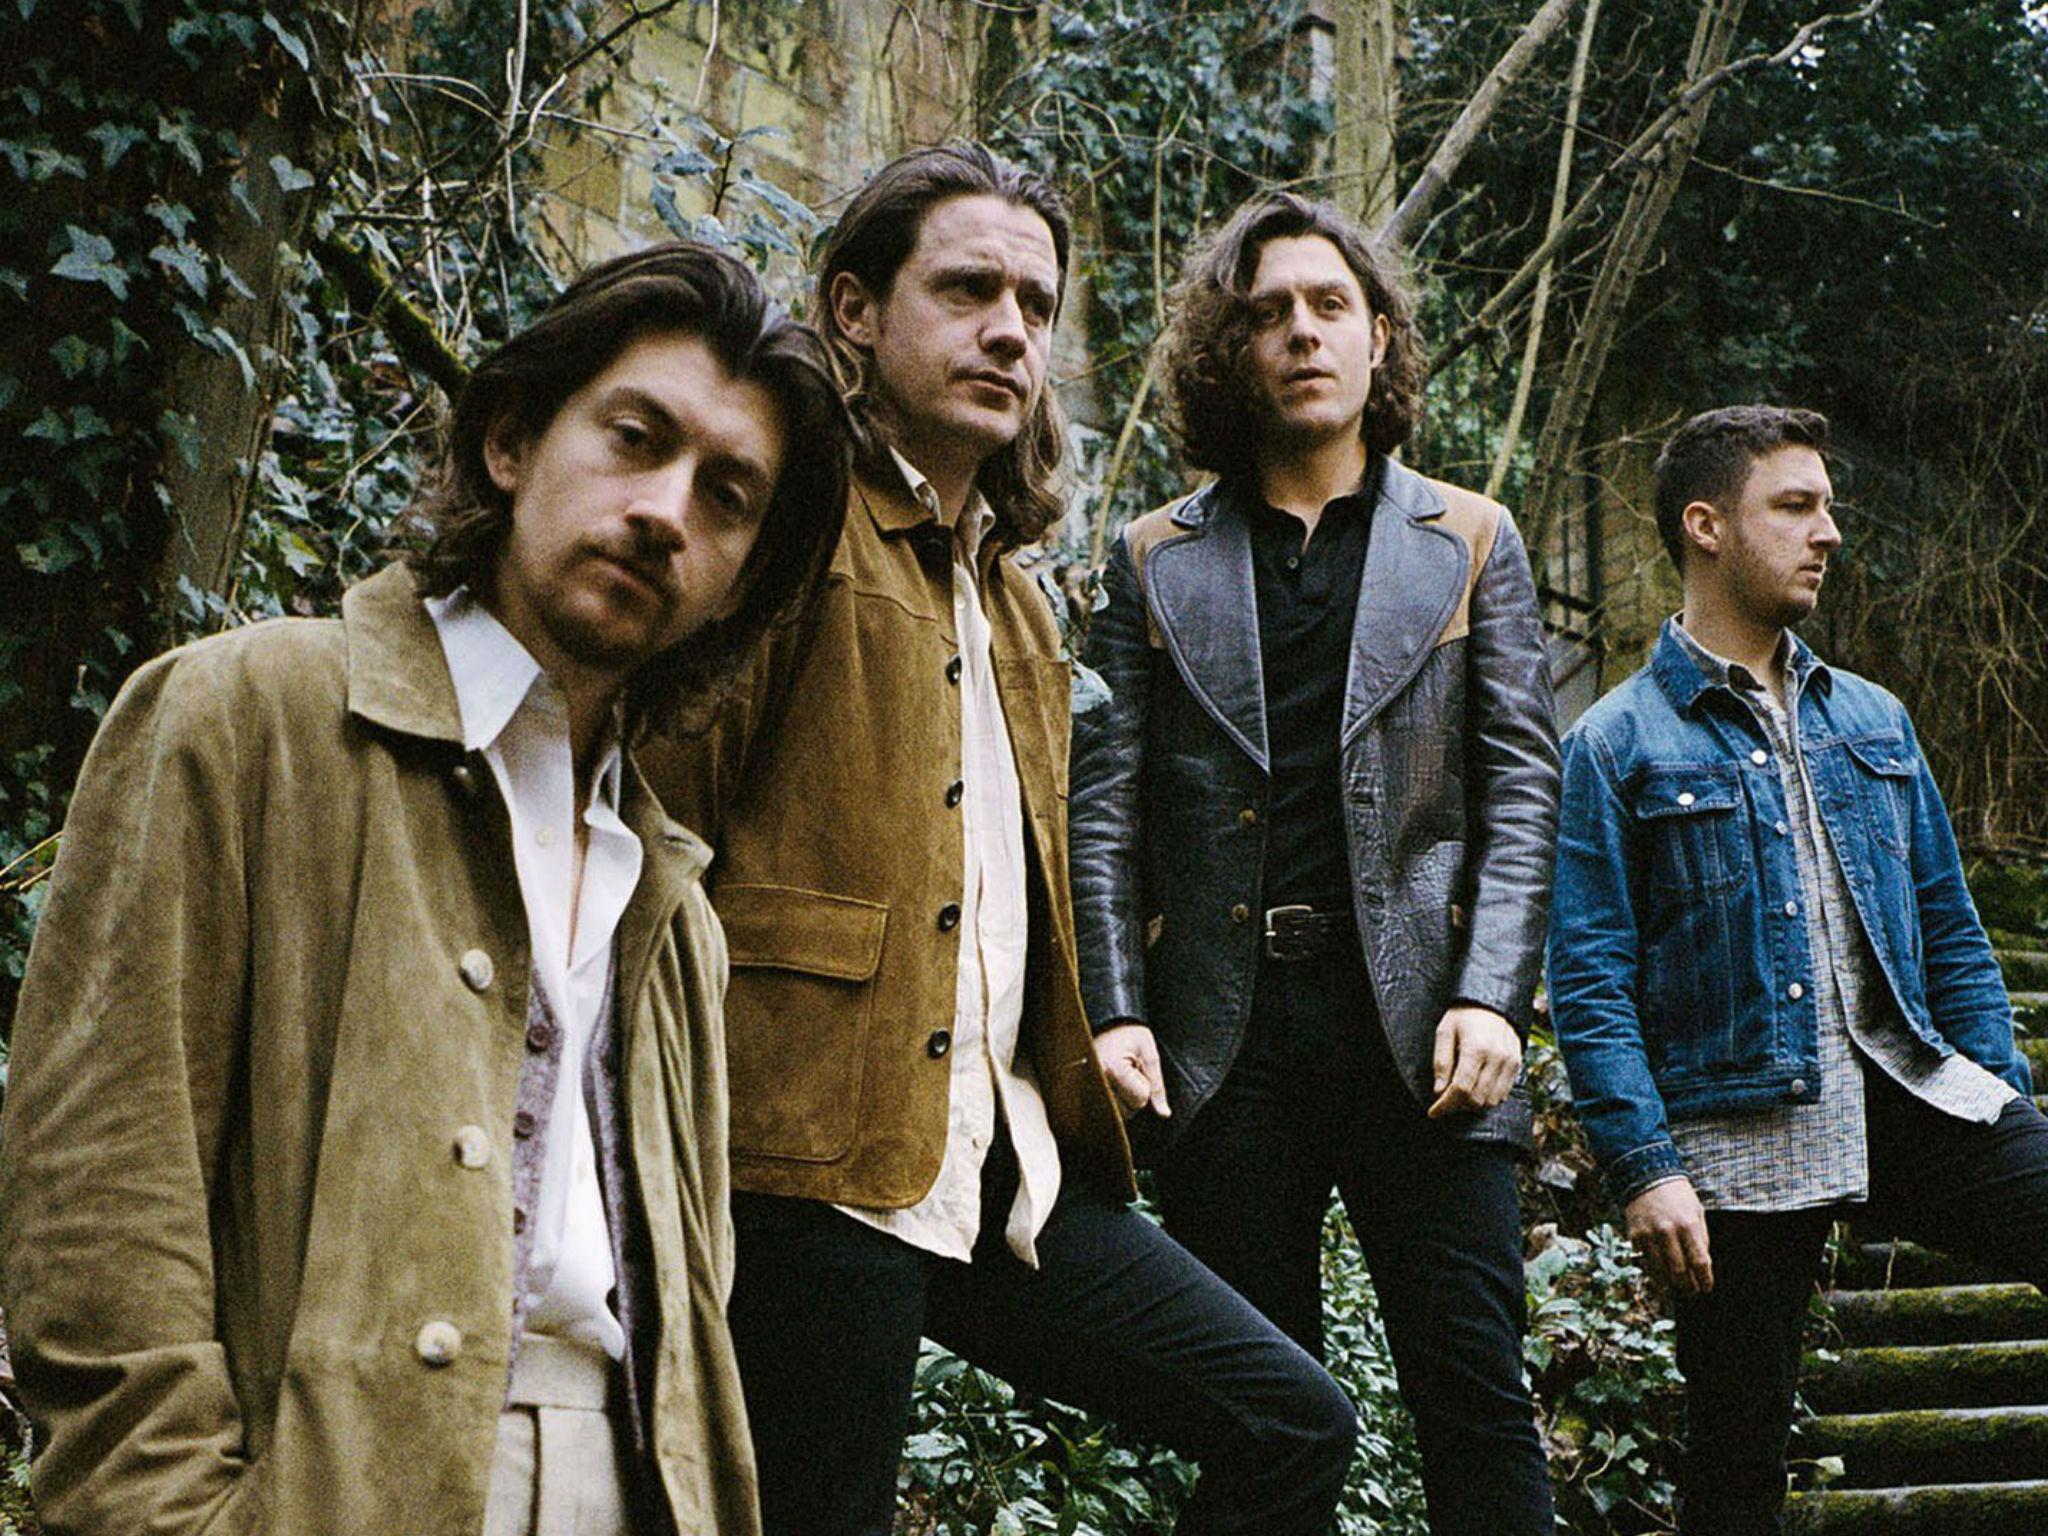 Arctic Monkeys release new song 'Anyways' – listen here, The Independent